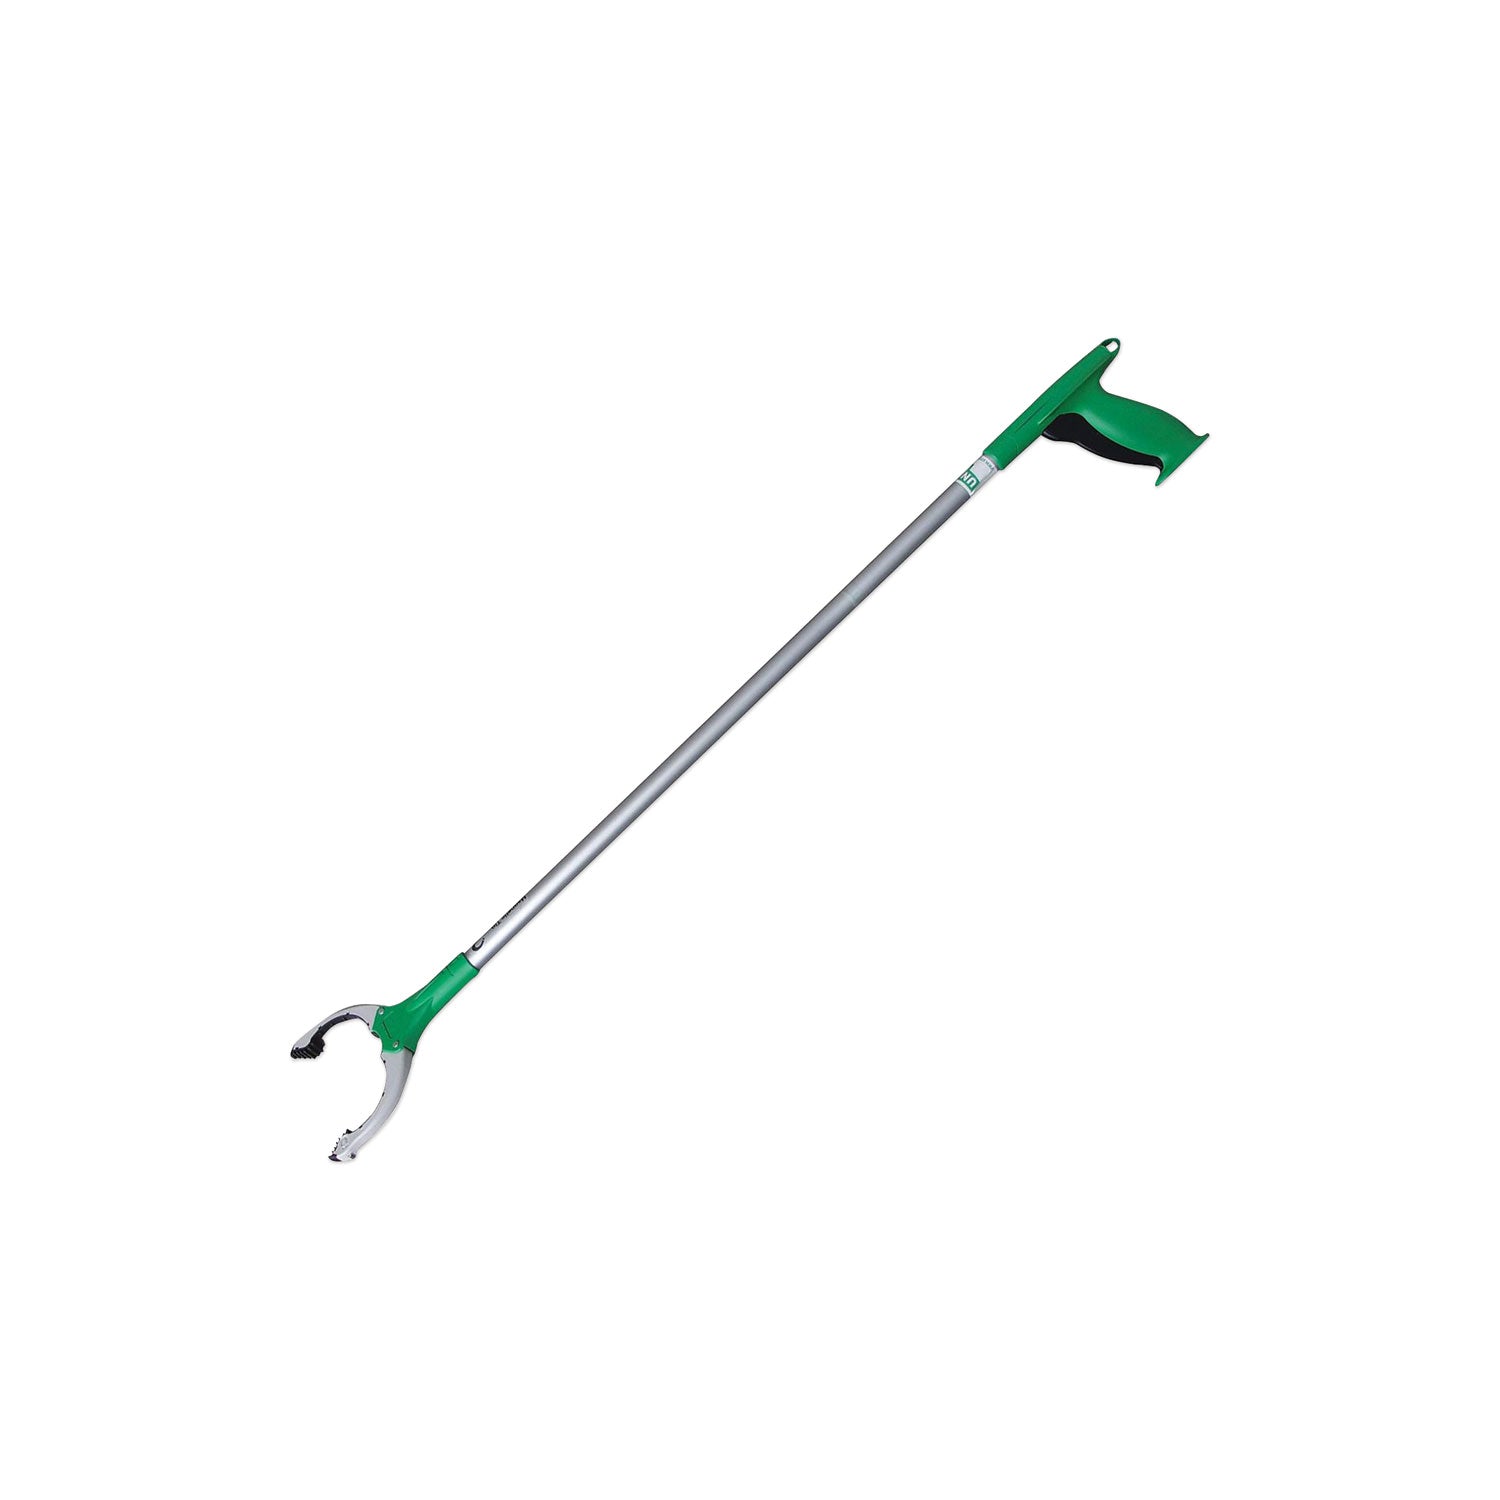 nifty-nabber-trigger-grip-extension-arm-3654-silver-green_ungnt090 - 1